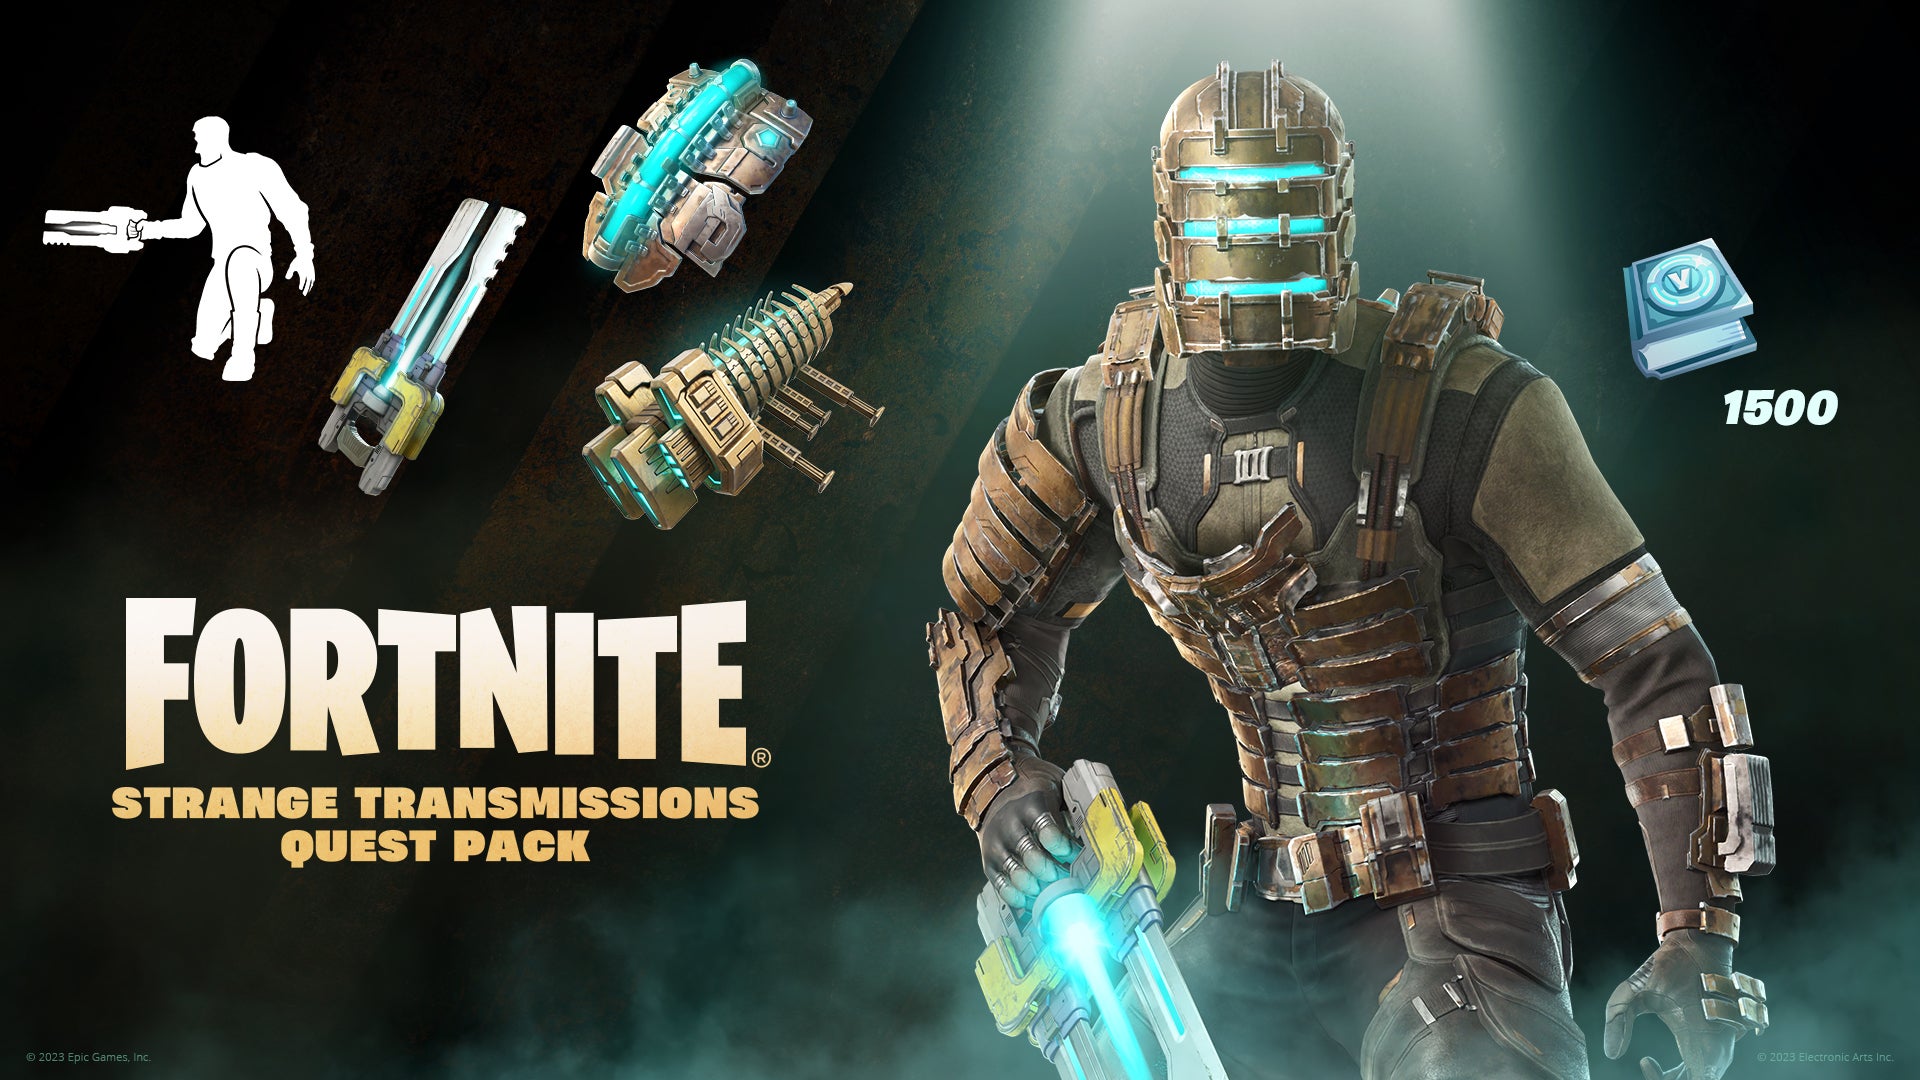 Fortnite's Strange Transmissions Quest Pack is shown, with Isaac Clarke of Dead Space